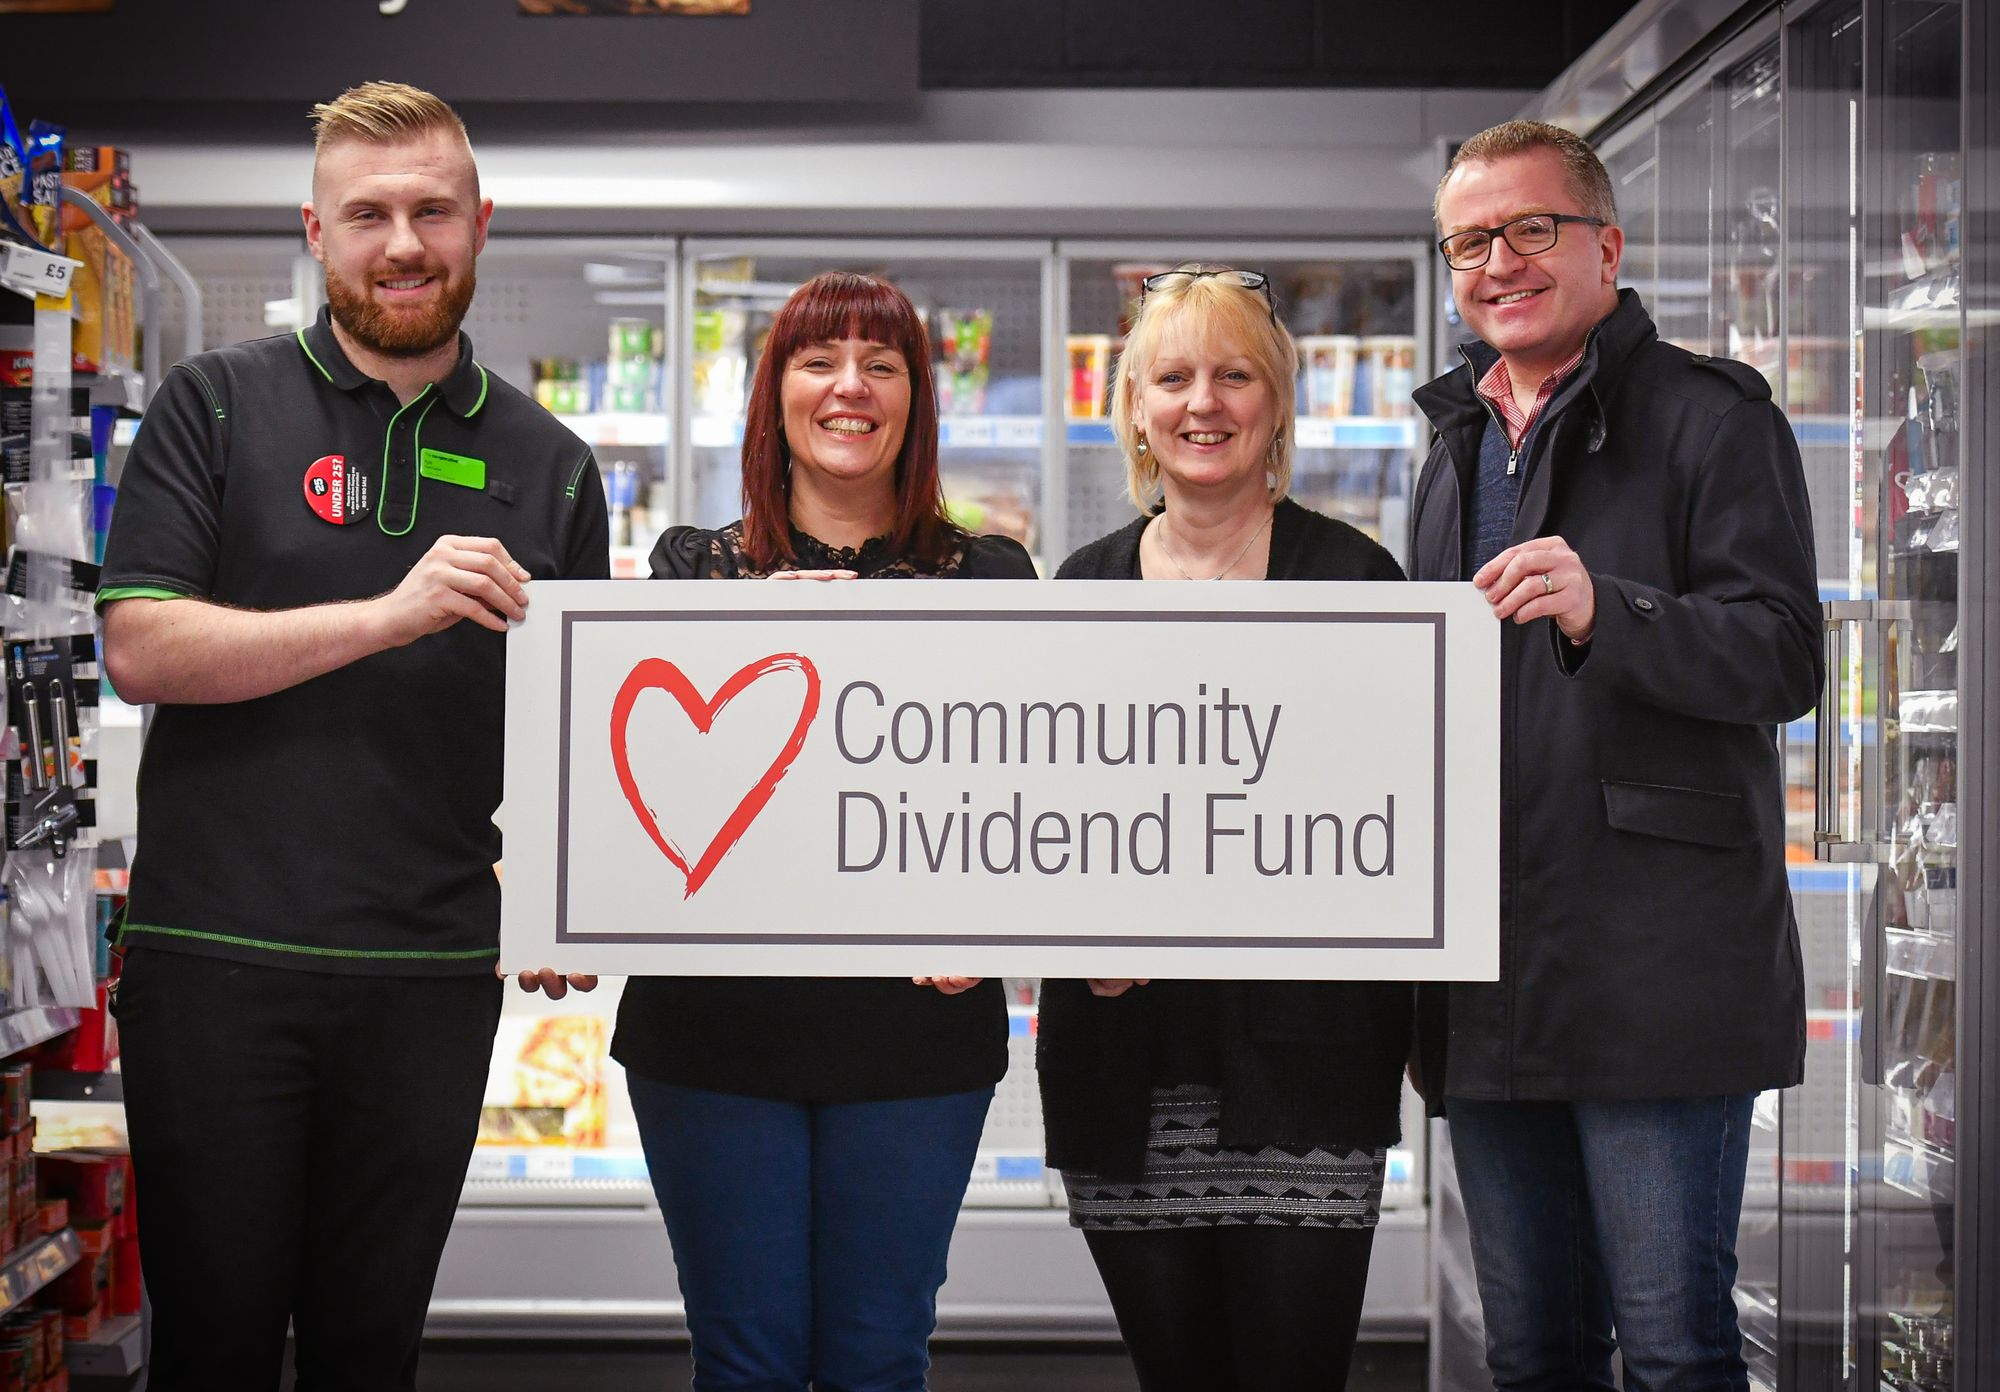 Nineteen good causes share £20,000 funding boost to tackle COVID-19 related problems thanks to Co-op community fund